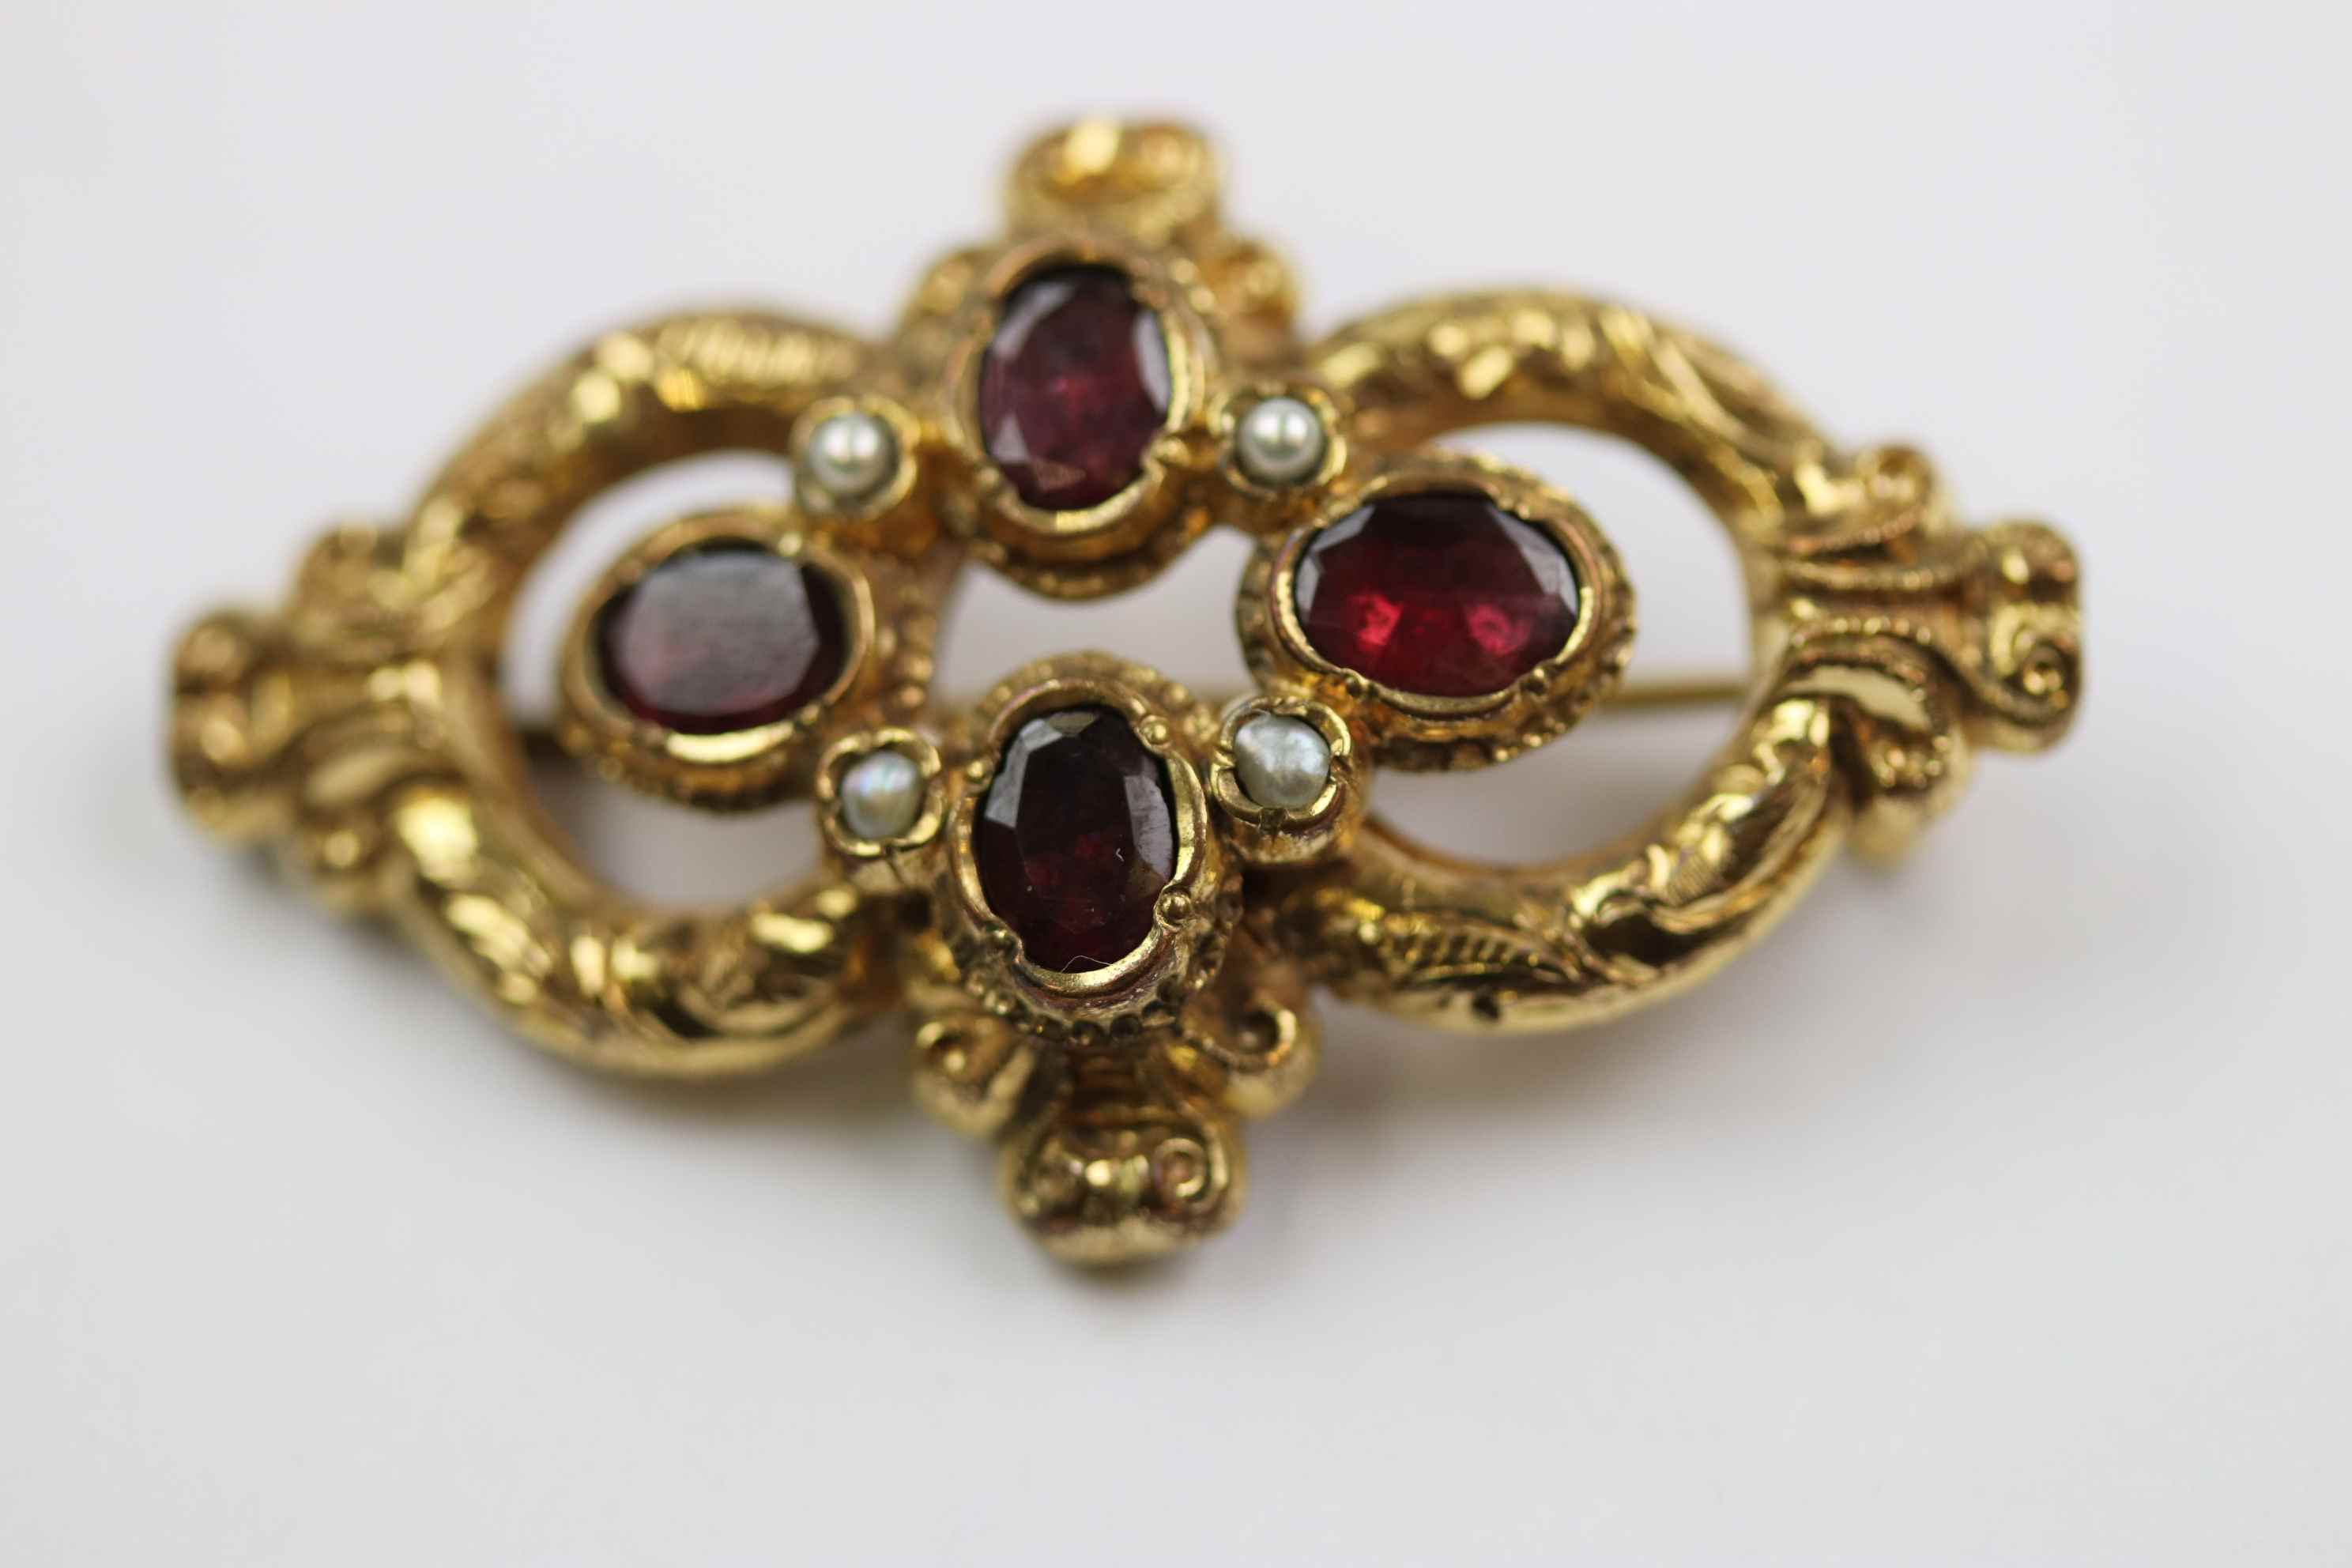 19th century garnet and seed pearl yellow metal brooch, four oval mixed cut garnets in quatre foil